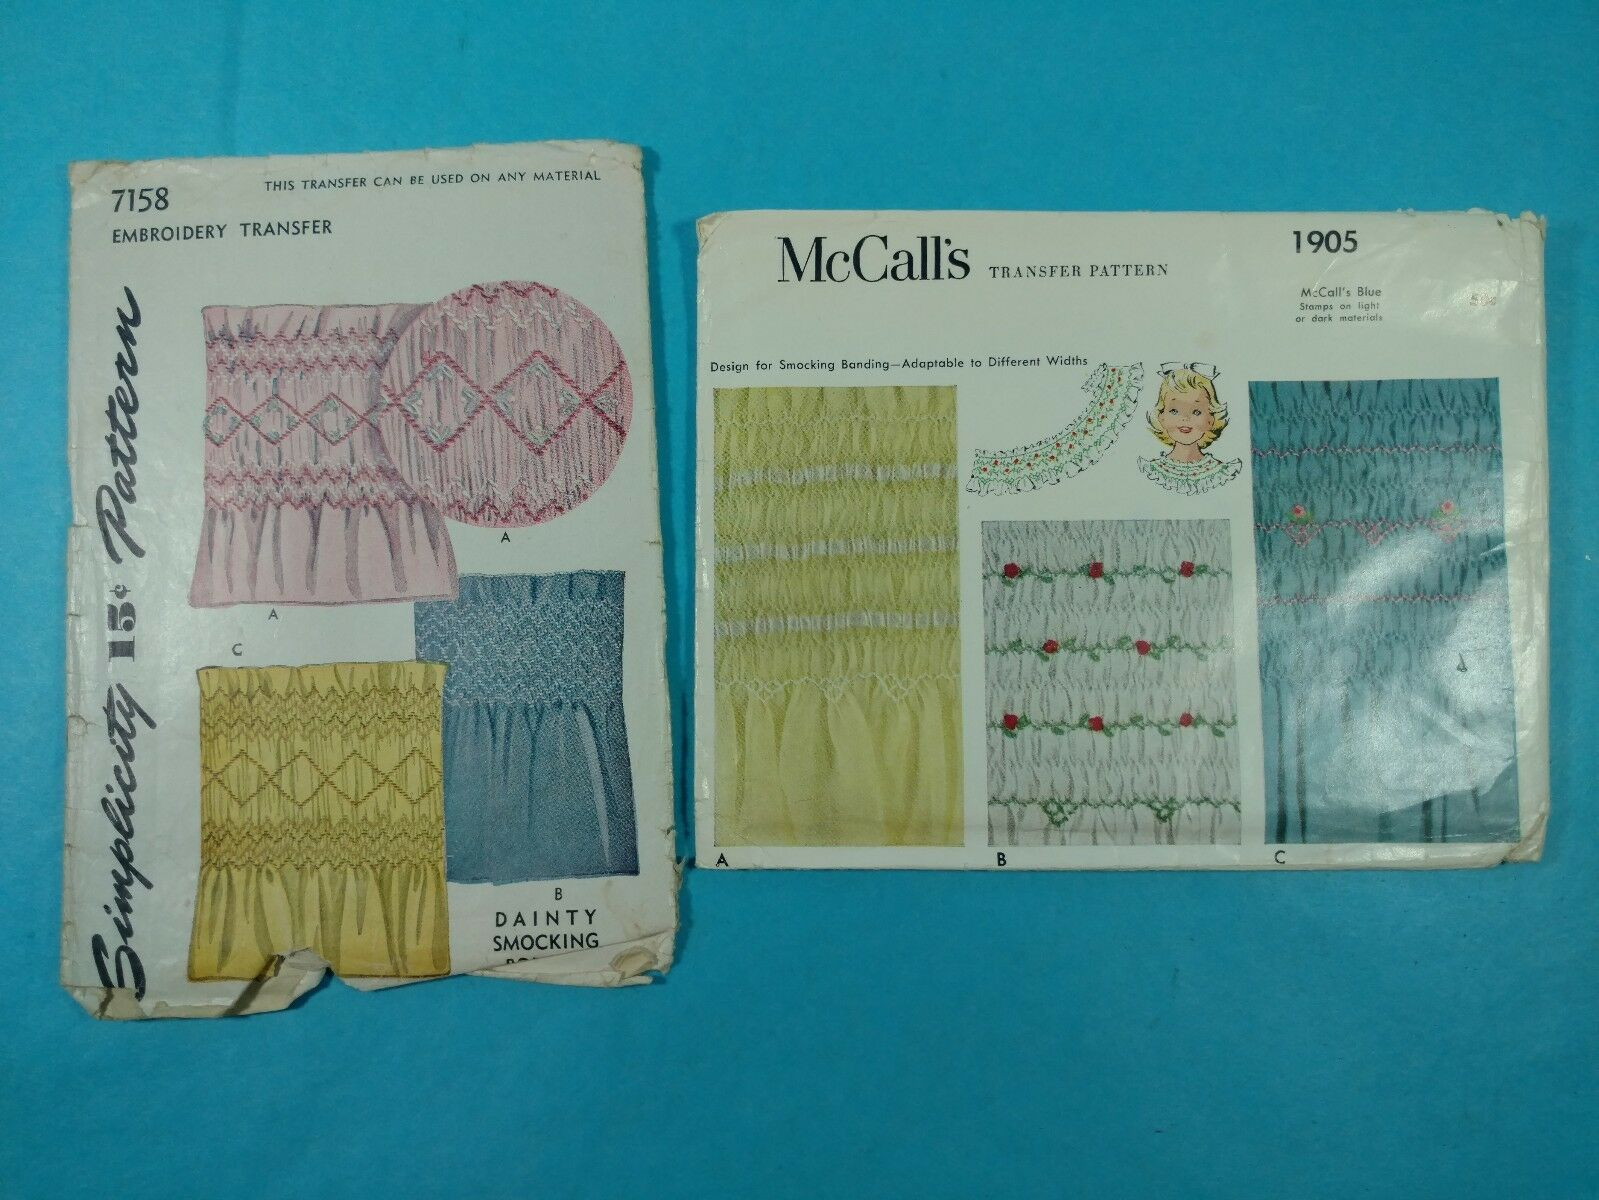 Vintage Embroidery Transfer Patterns Lot 120 Group Of 2 Vintage Sewing Patterns Embroidery Transfer Pattern